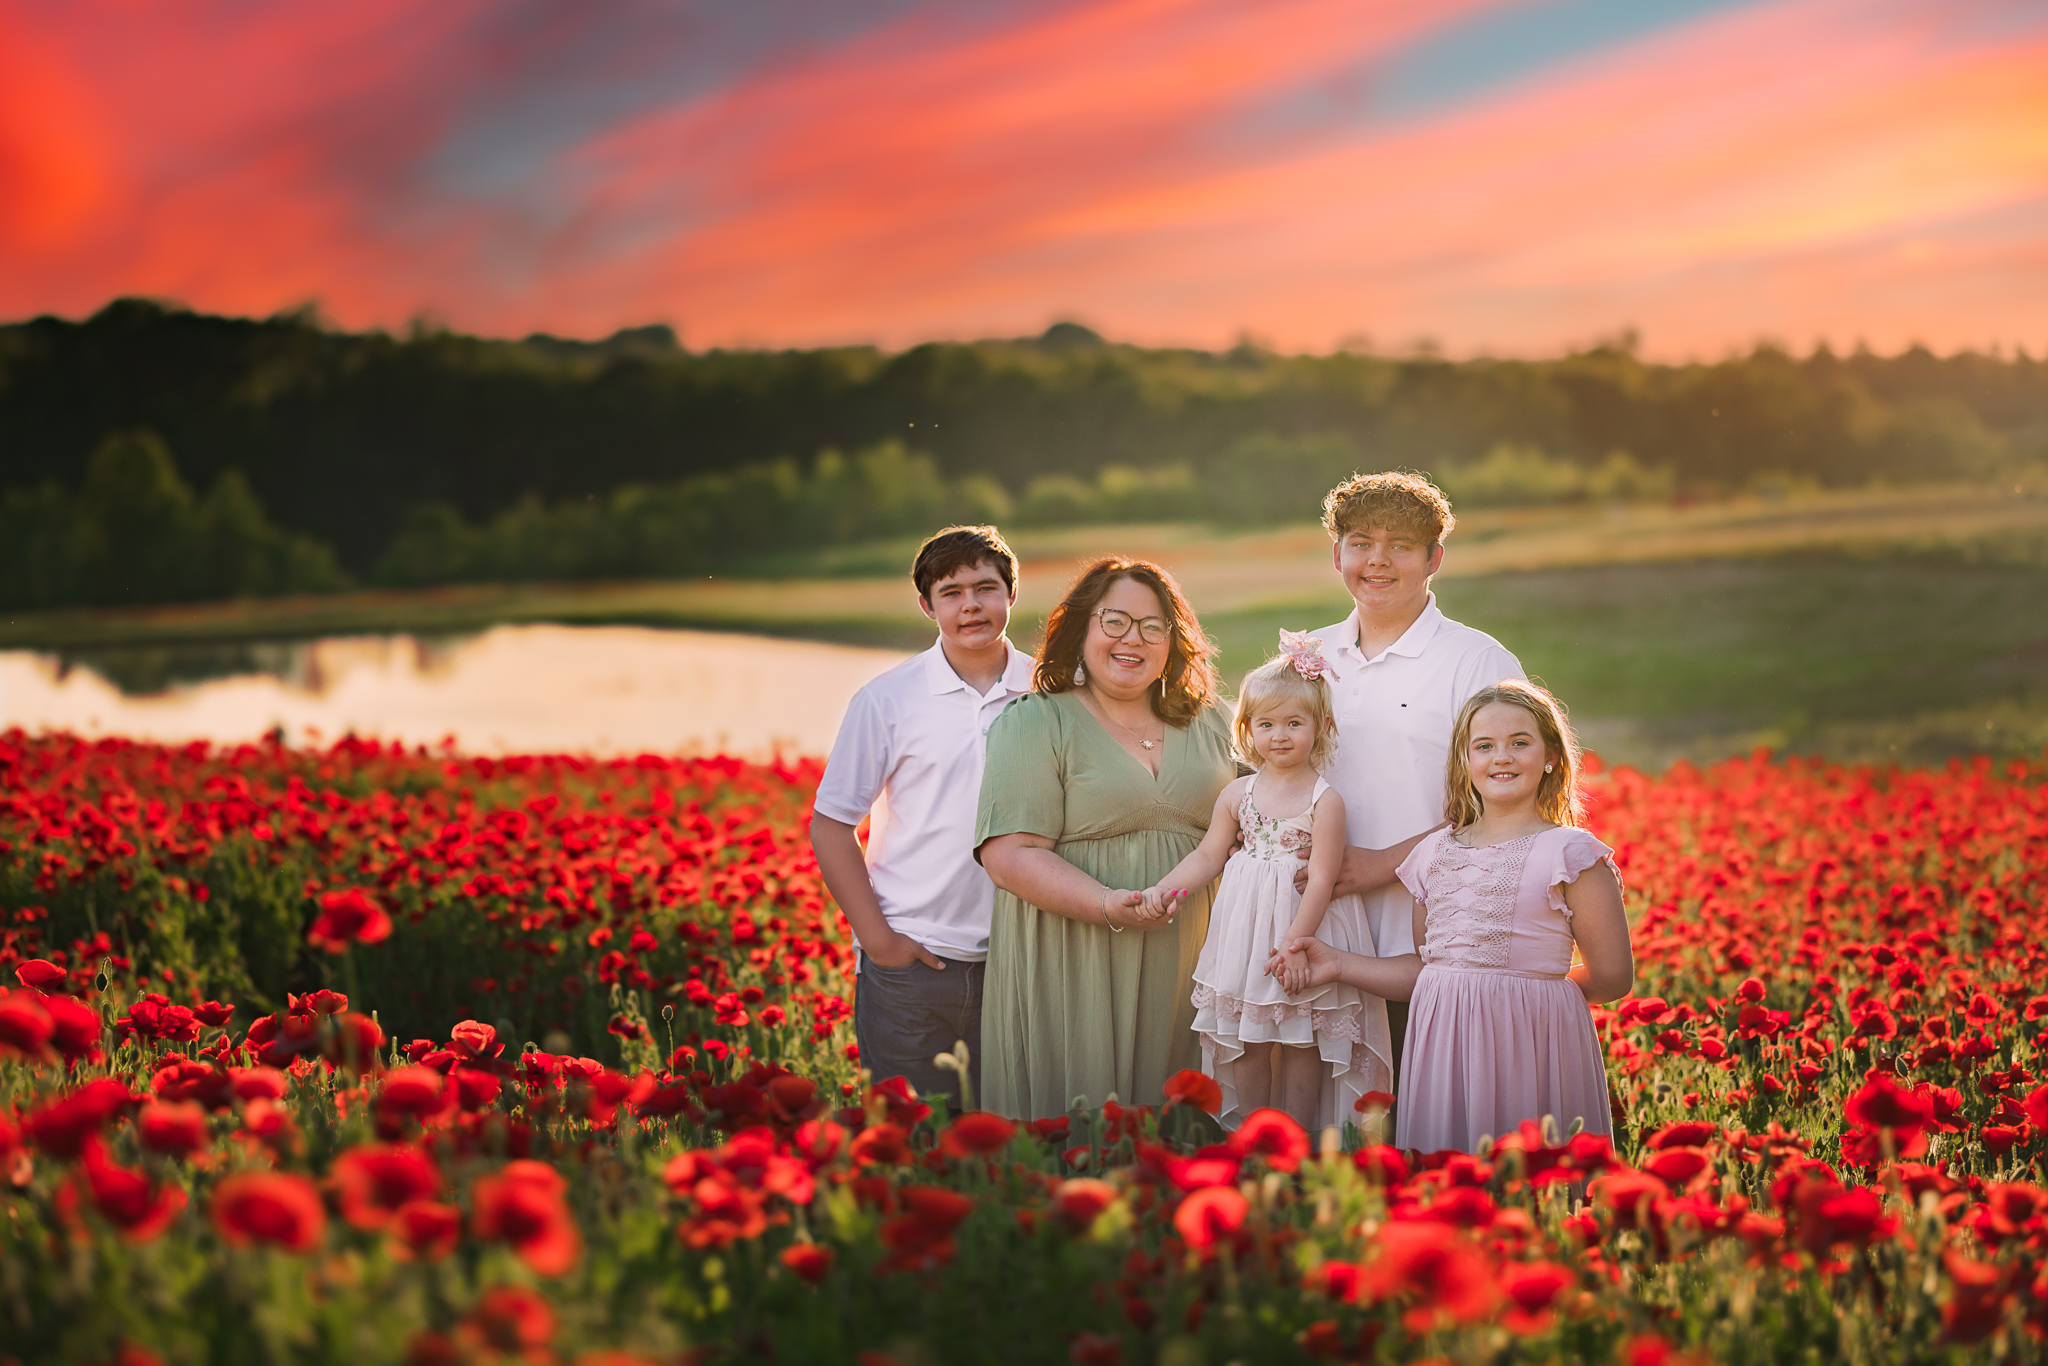 mom and her children in a beautiful field of red poppies